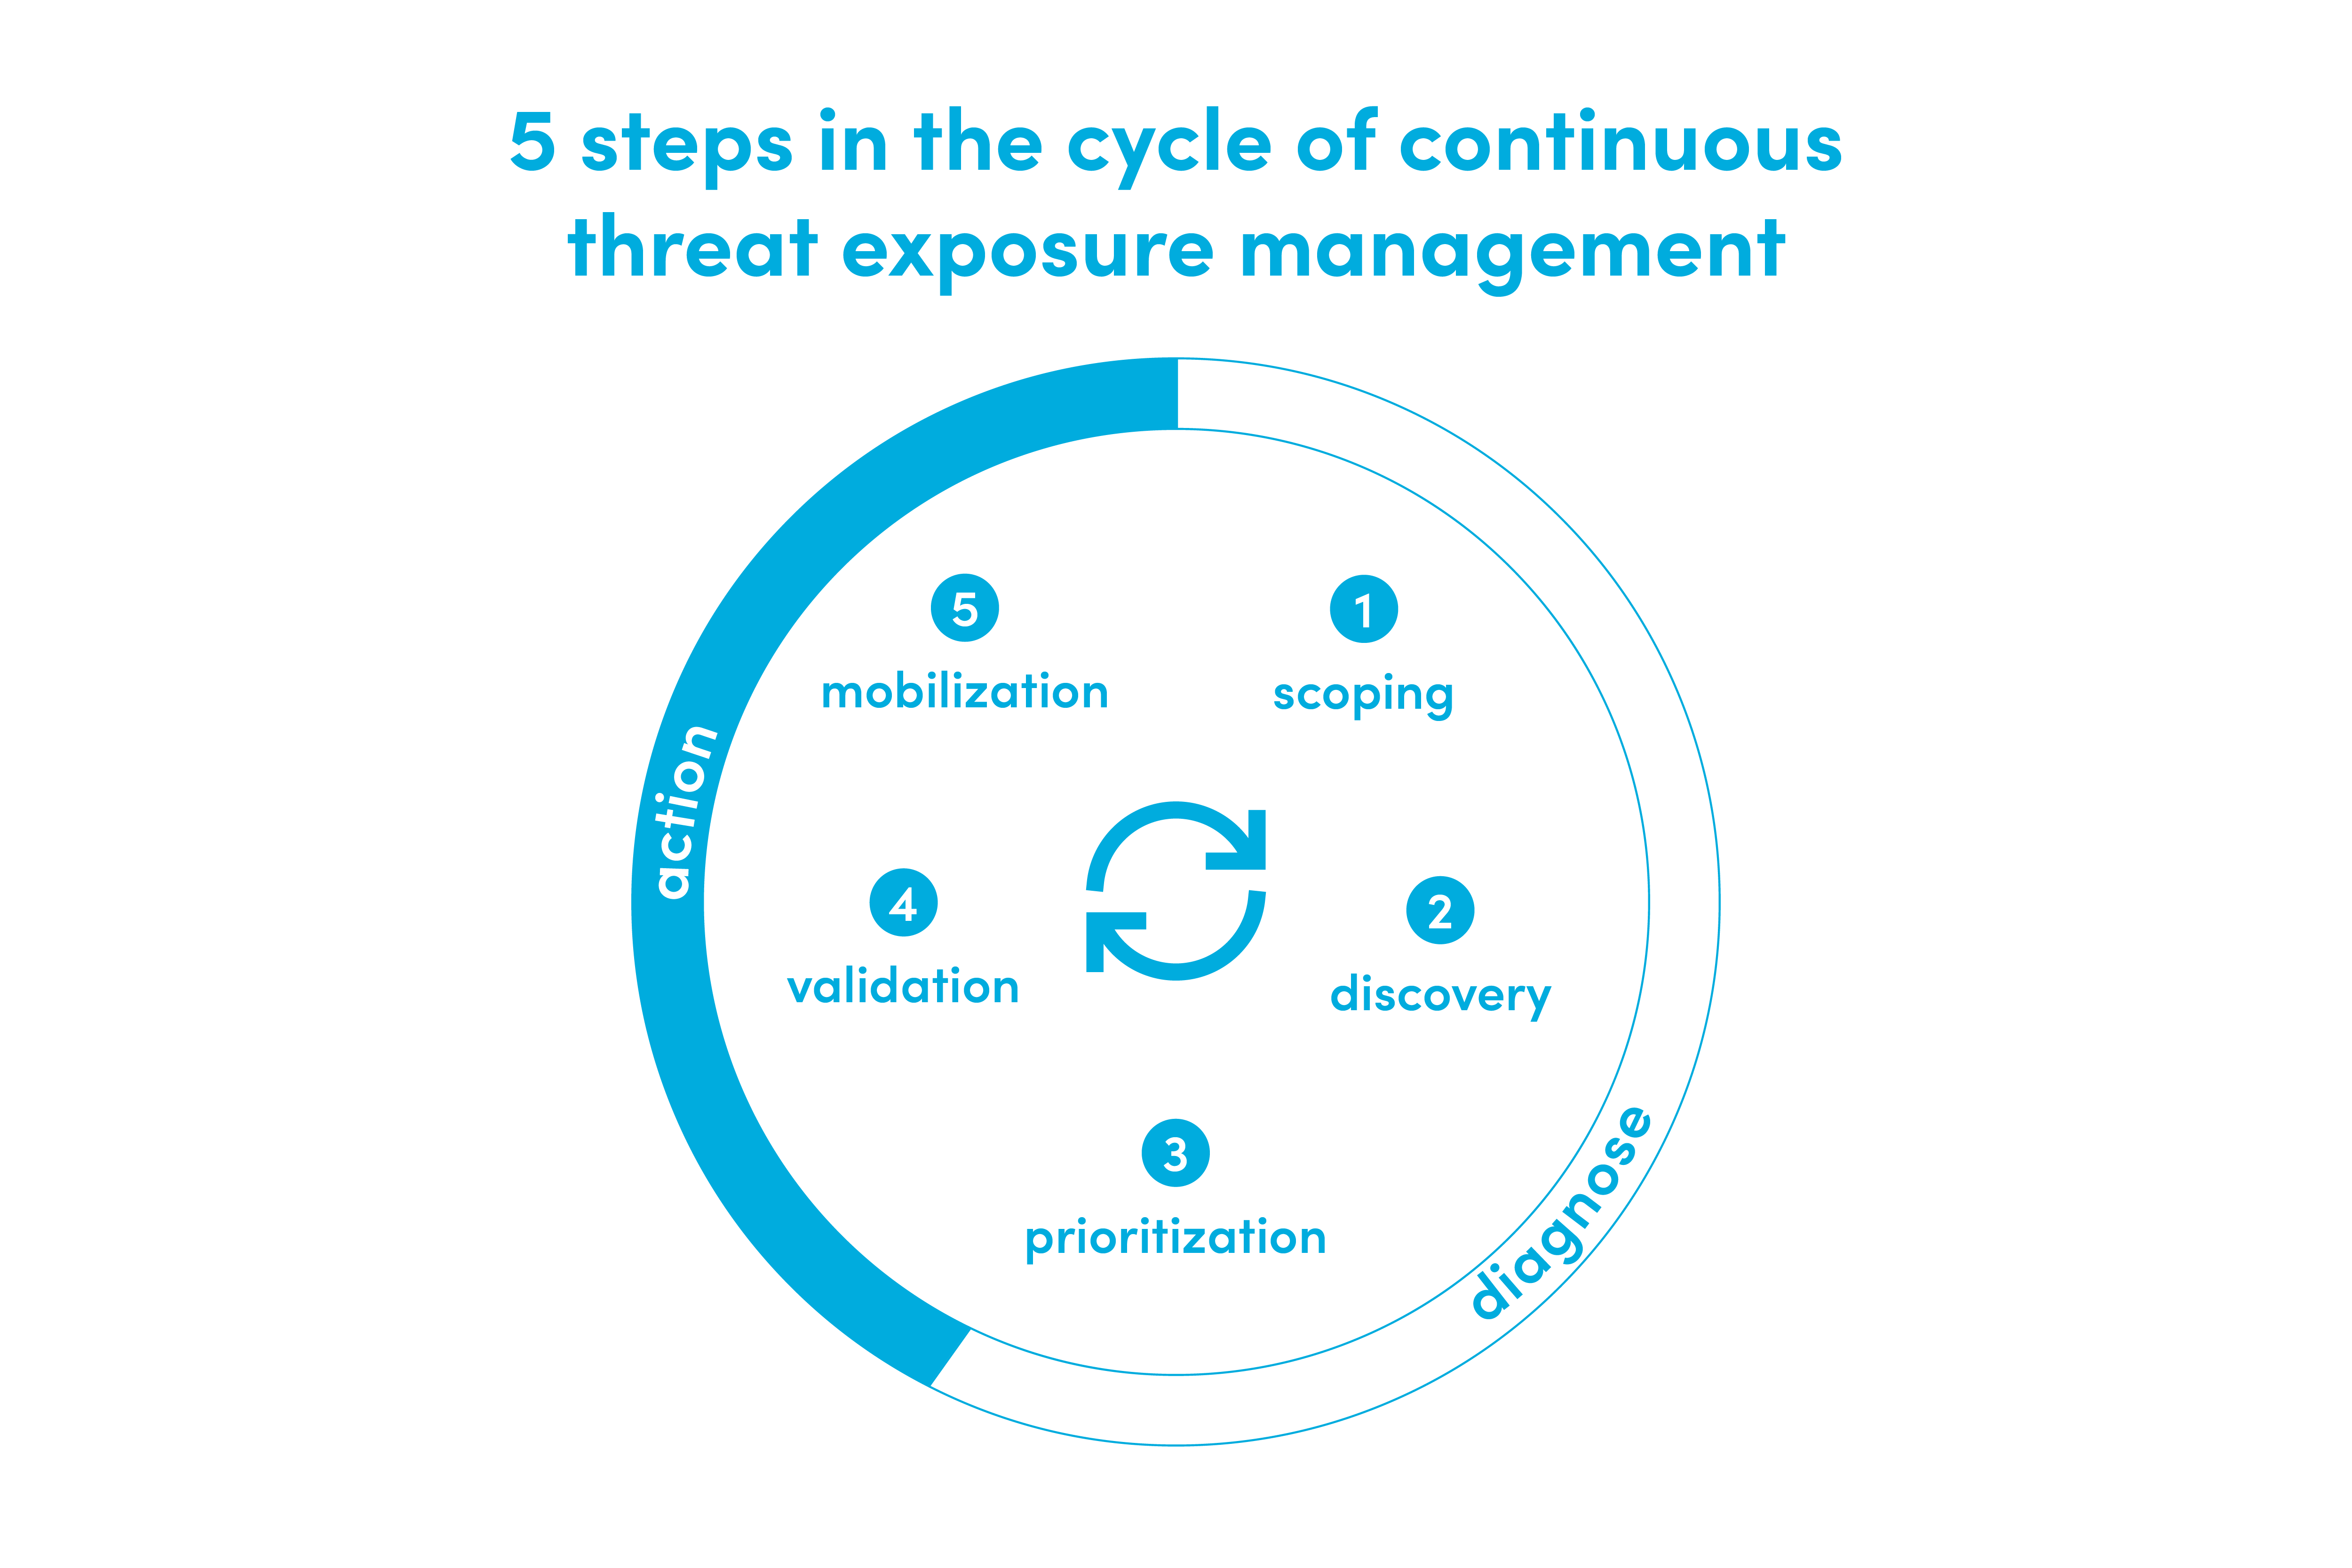 A screenshot of the 5 steps in the cycle of continuous threat exposure management.